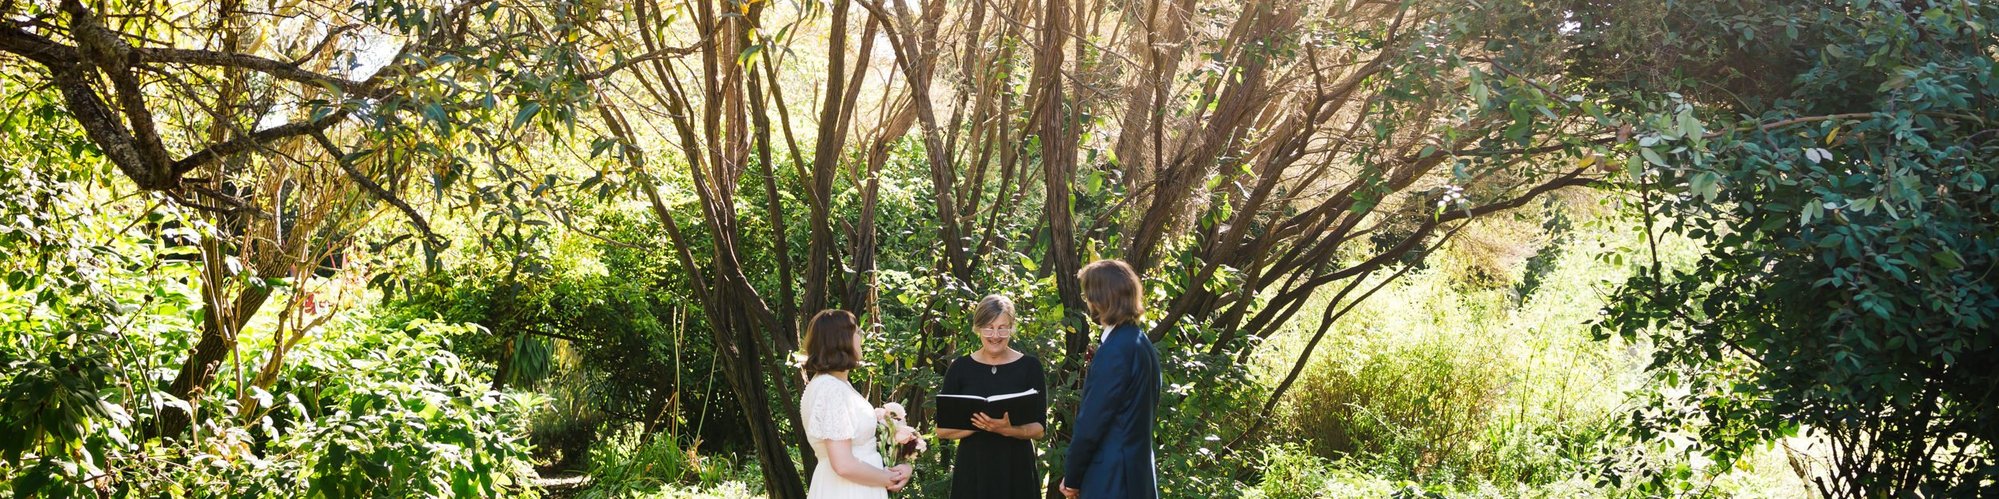 A bride and groom celebrate their elopement ceremony under a tea tree in a private garden